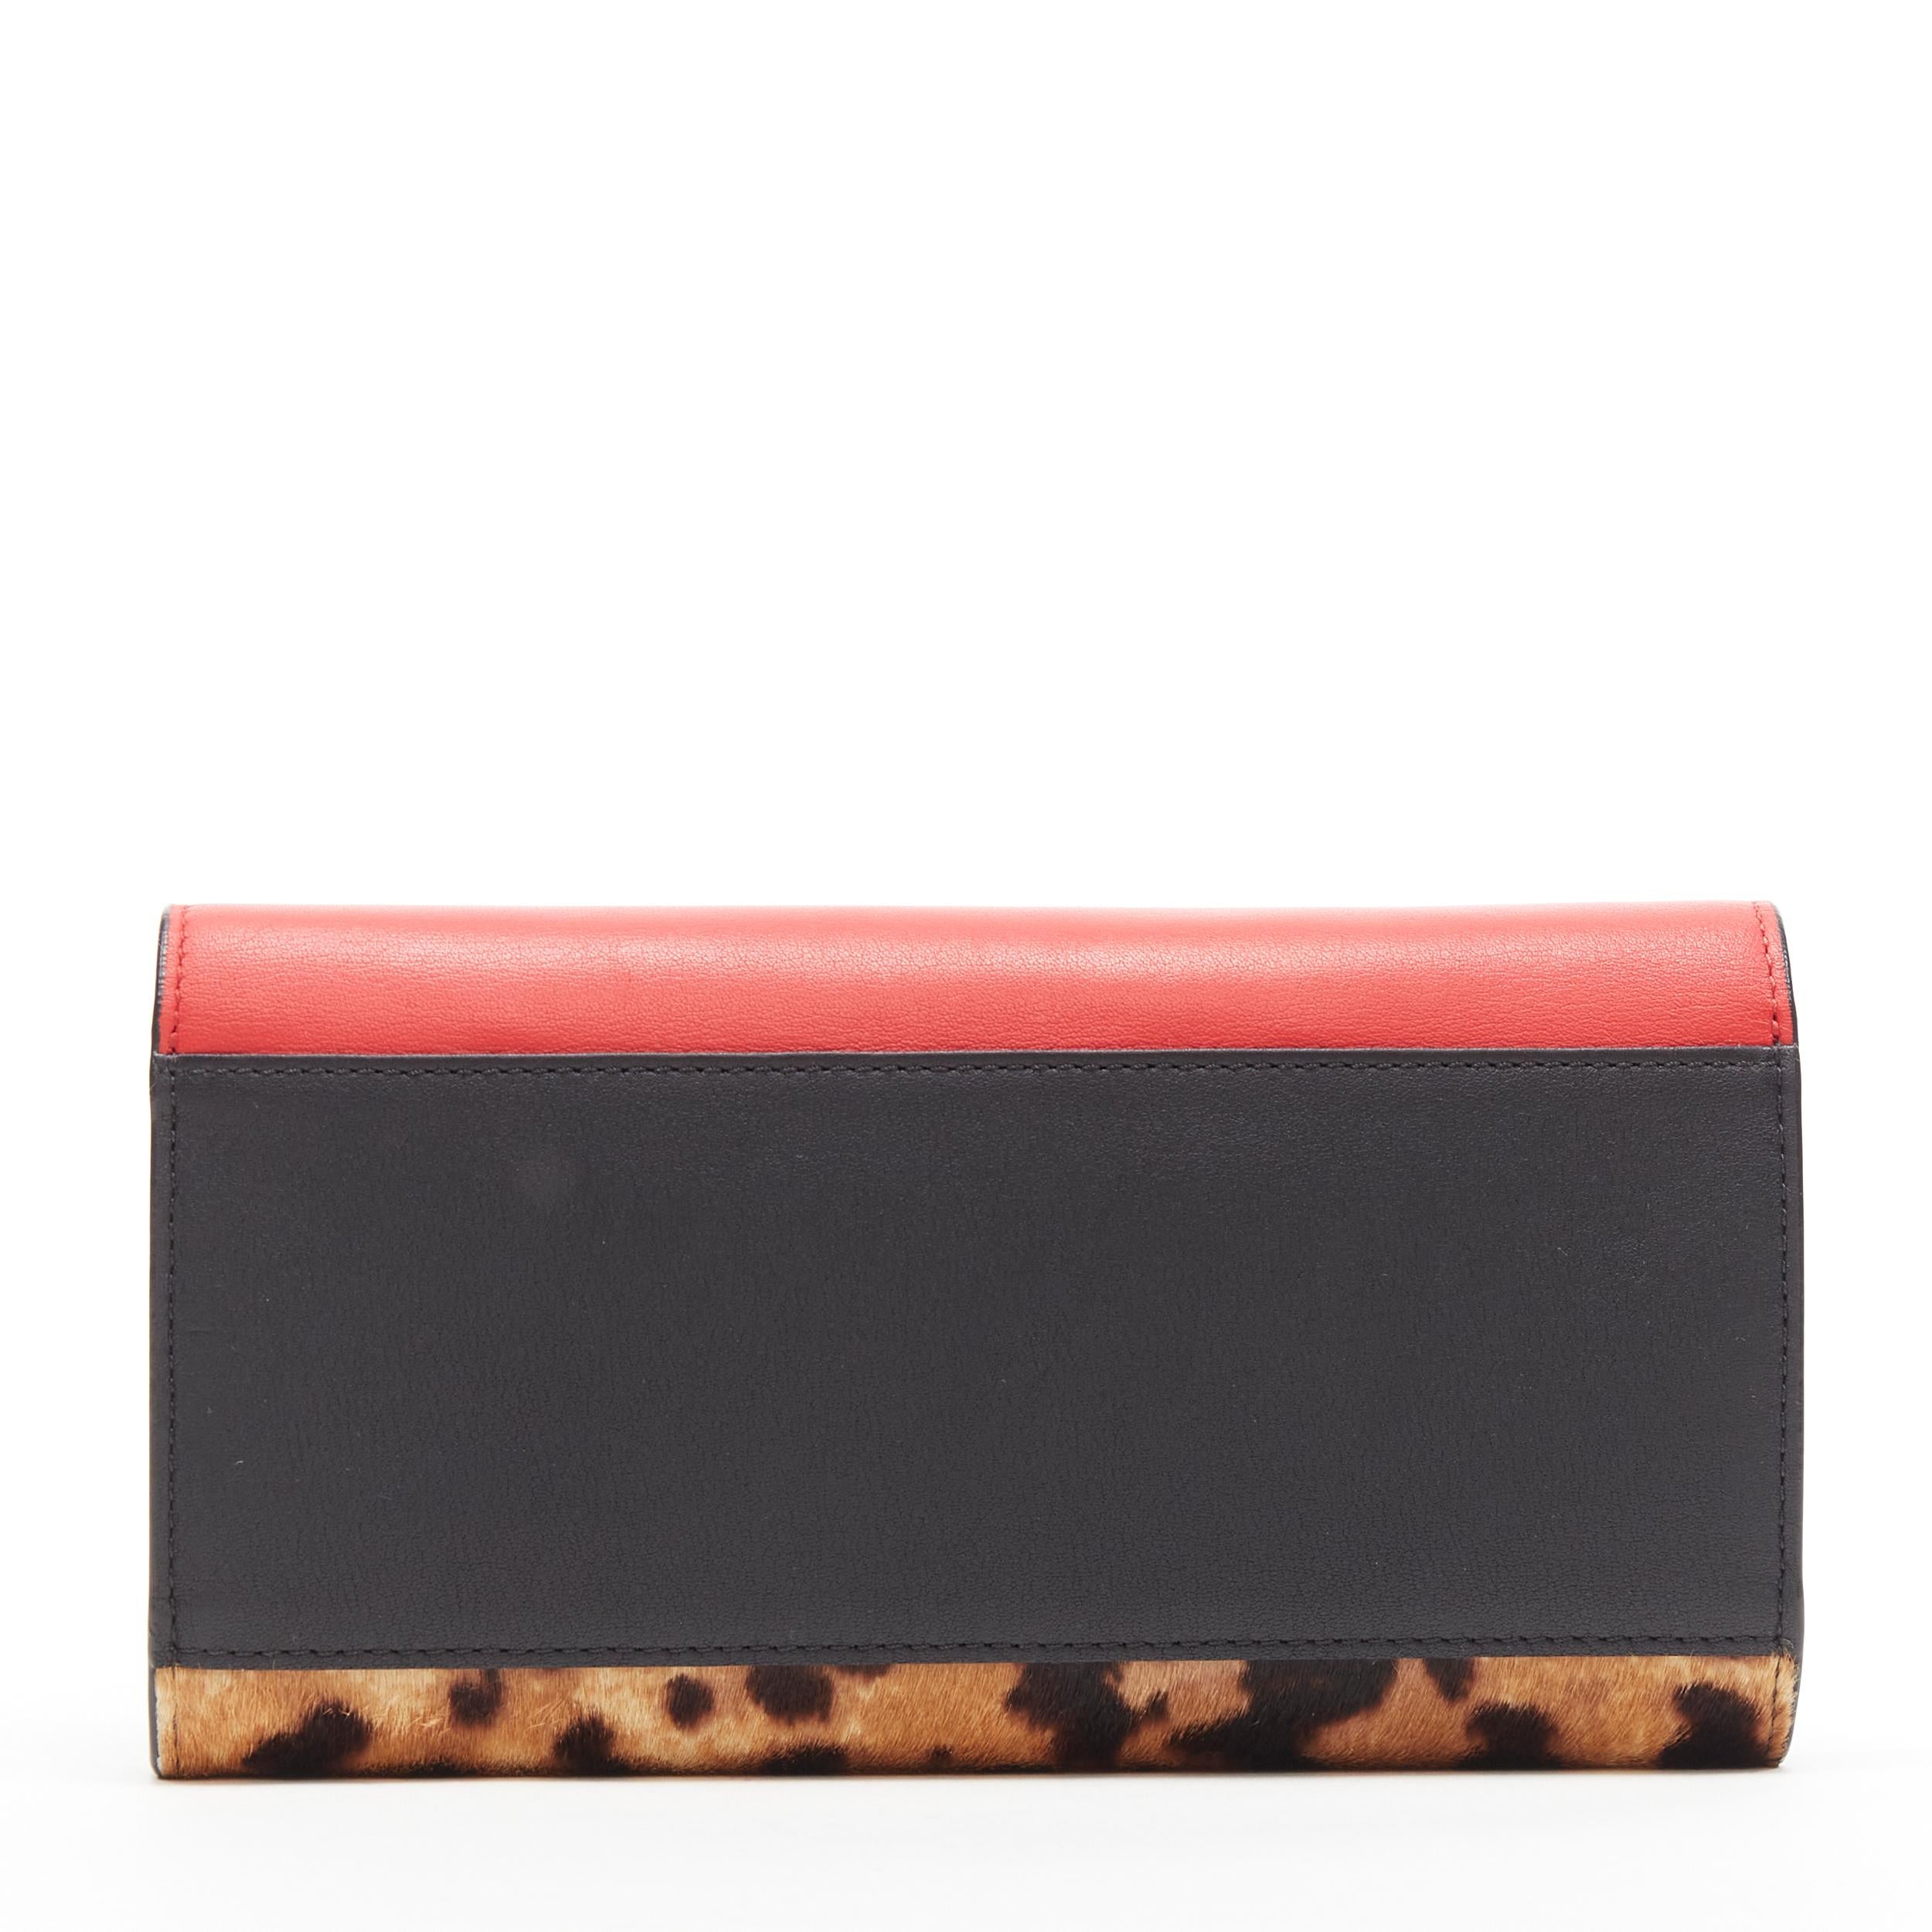 new MCM red leopard gold studded flap cardholder long wallet on chain clutch bag Reference: CAWG/A00184 
Brand: MCM 
Model: Wallet on chain 
Material: Leather 
Color: Red 
Pattern: Leopard 
Closure: Button 
Extra Detail: Wallet on chain with